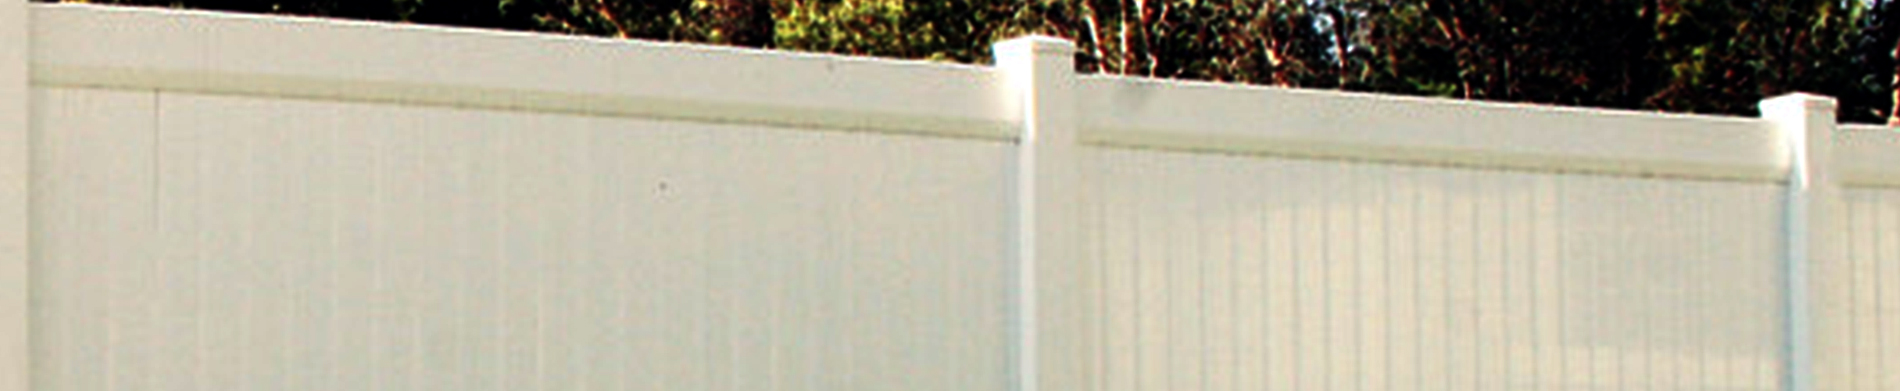 Different Vinyl Privacy Fence Ideas for Your Property